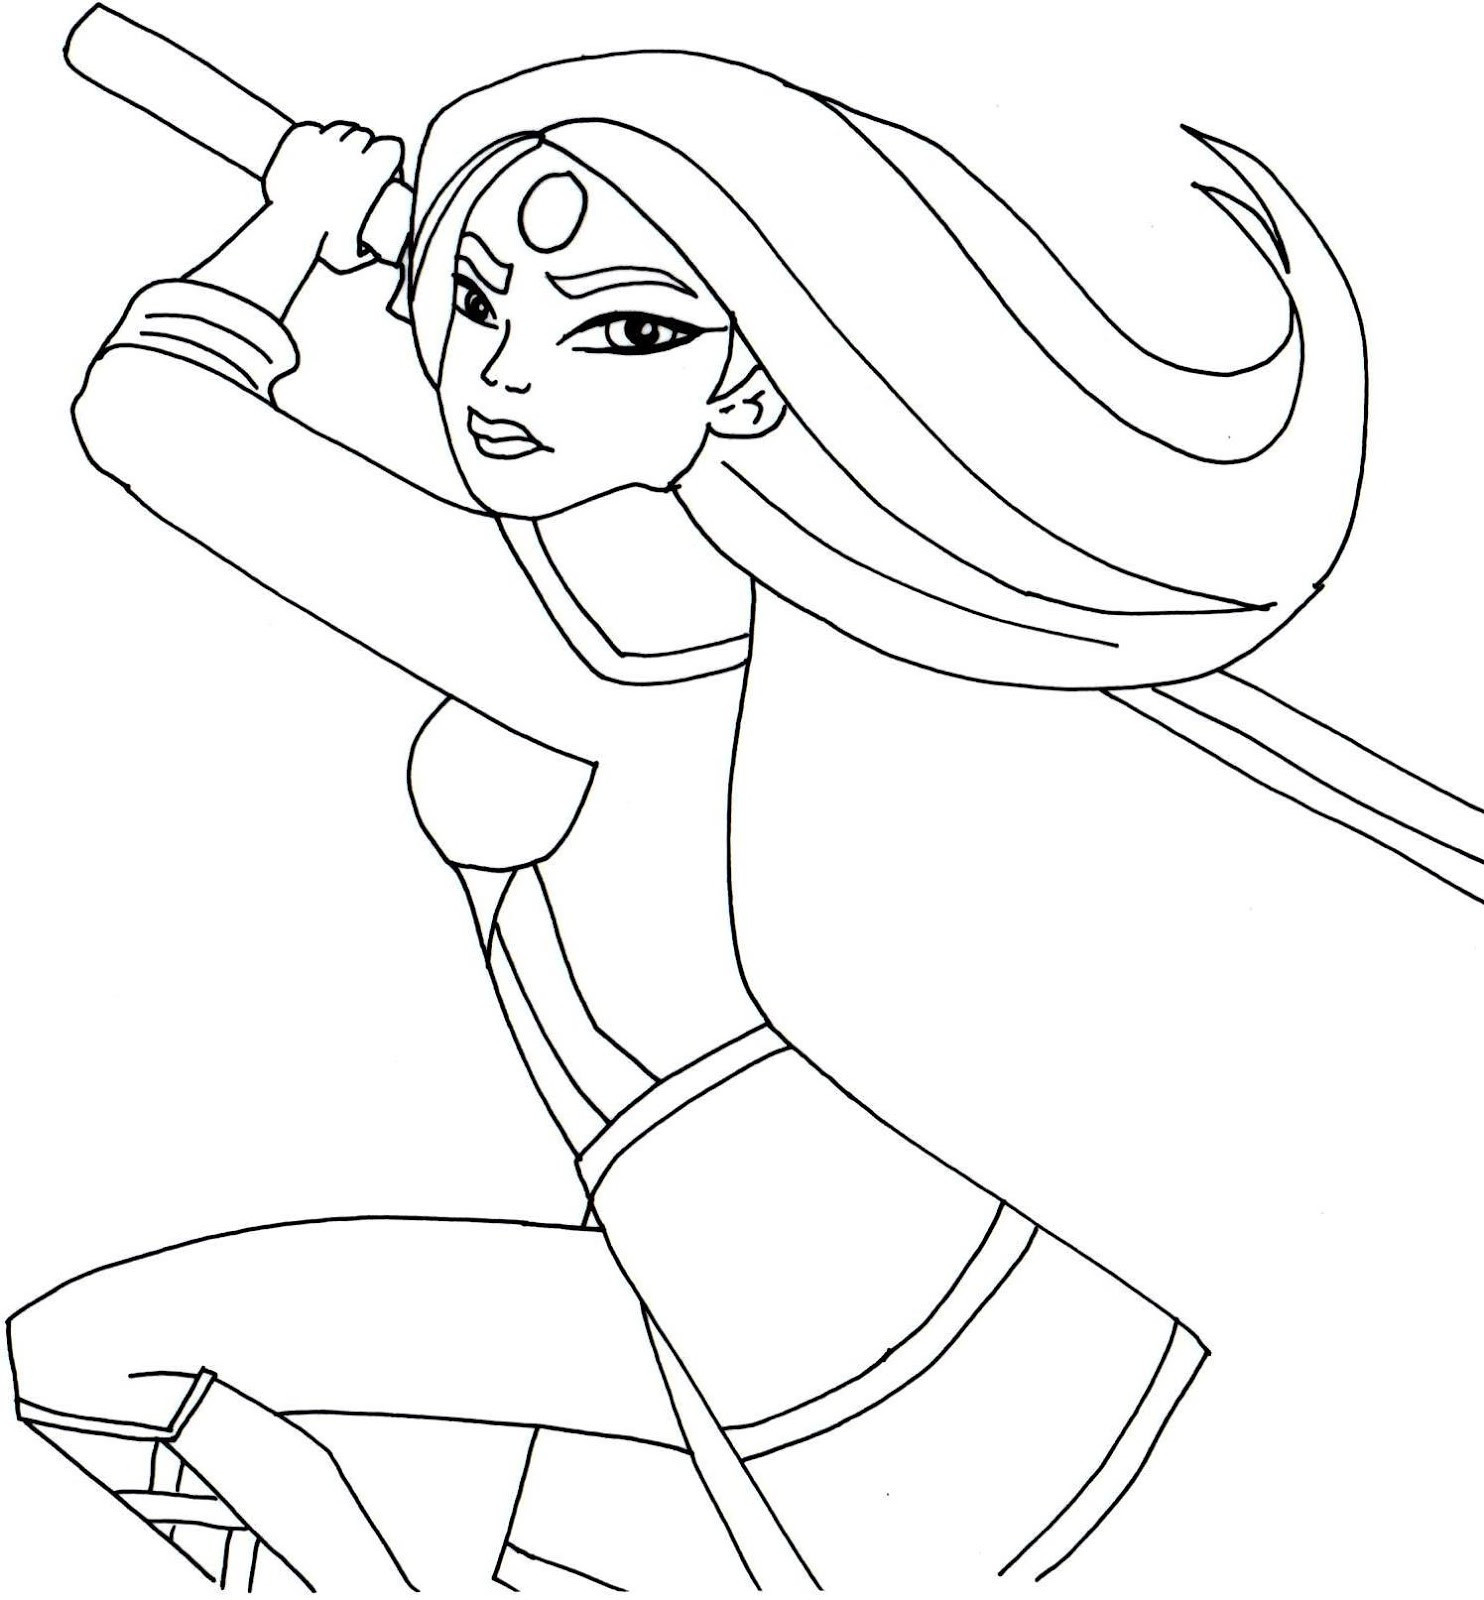 Super Hero Coloring Book Pages
 Dc Superhero Girls Coloring Sheets thekindproject